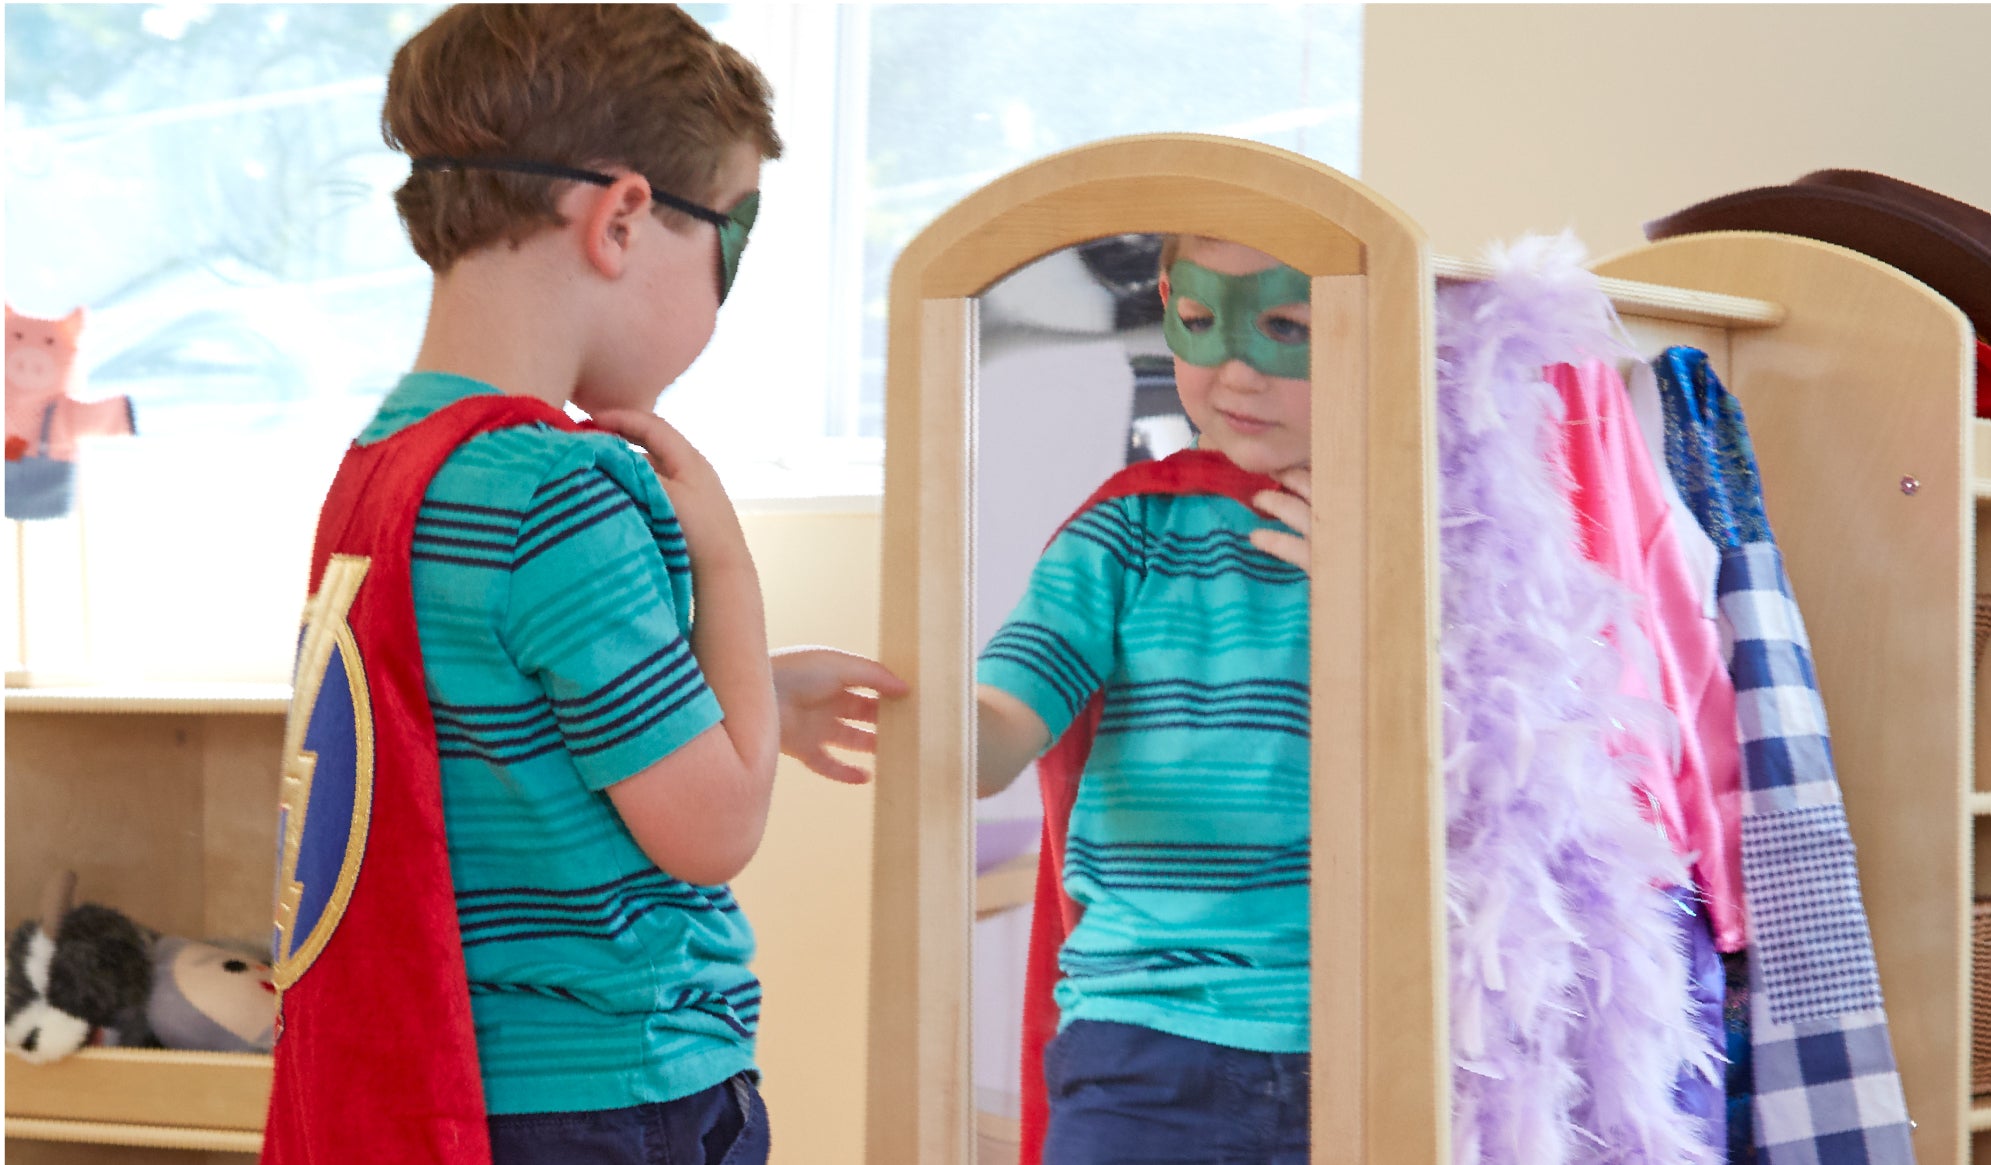 Image of a young boy looking at himself in the mirror of a Guidecraft dress up center dressed as a super hero.